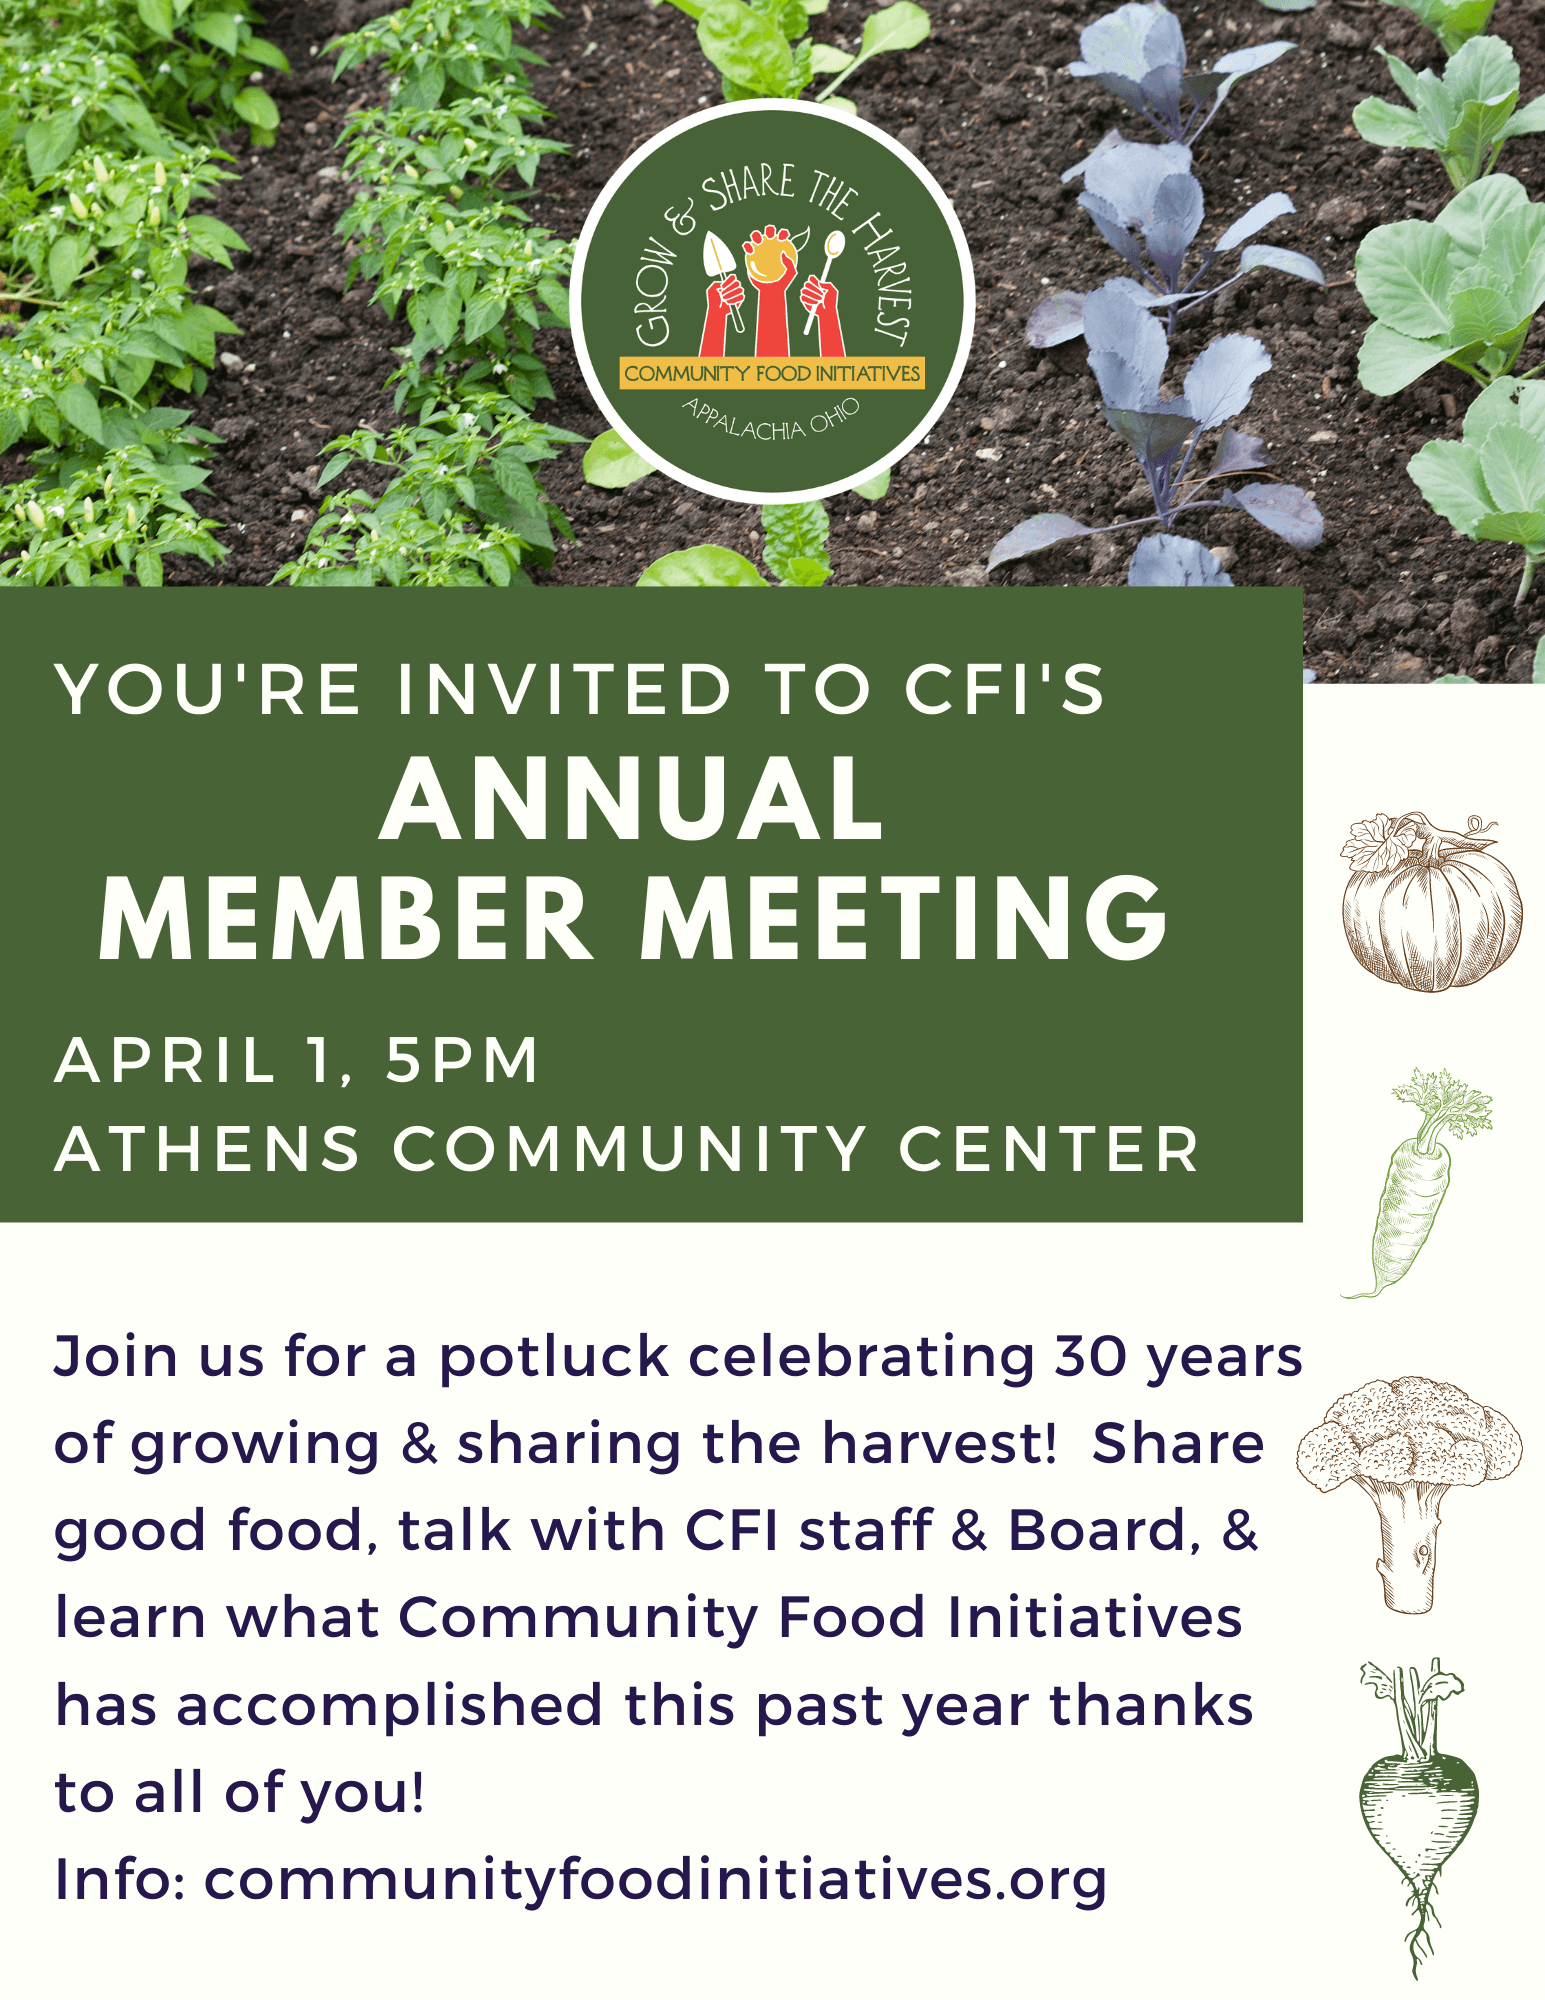 On April 1 at 5pm at the Athens Community Center, join us for a potluck celebrating 30 years of growing & sharing the harvest!  Share good food, talk with CFI staff & Board, & learn what Community Food Initiatives has accomplished this past year thanks to